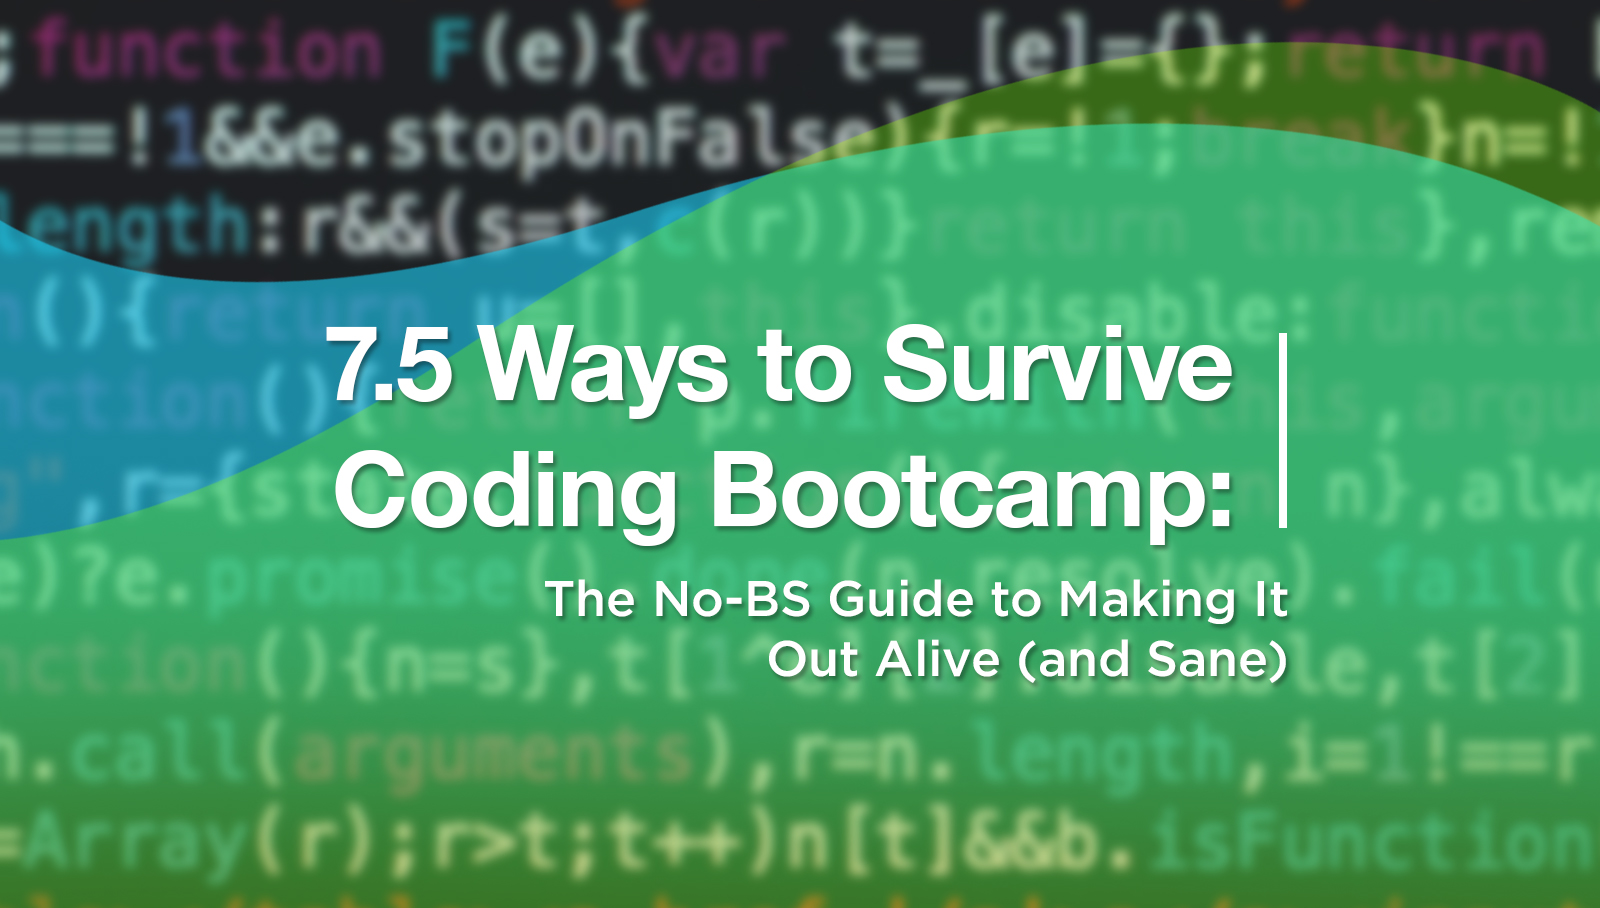 7.5 Ways to Survive Coding Bootcamp: The No-BS Guide to Making It Out Alive (and Sane)